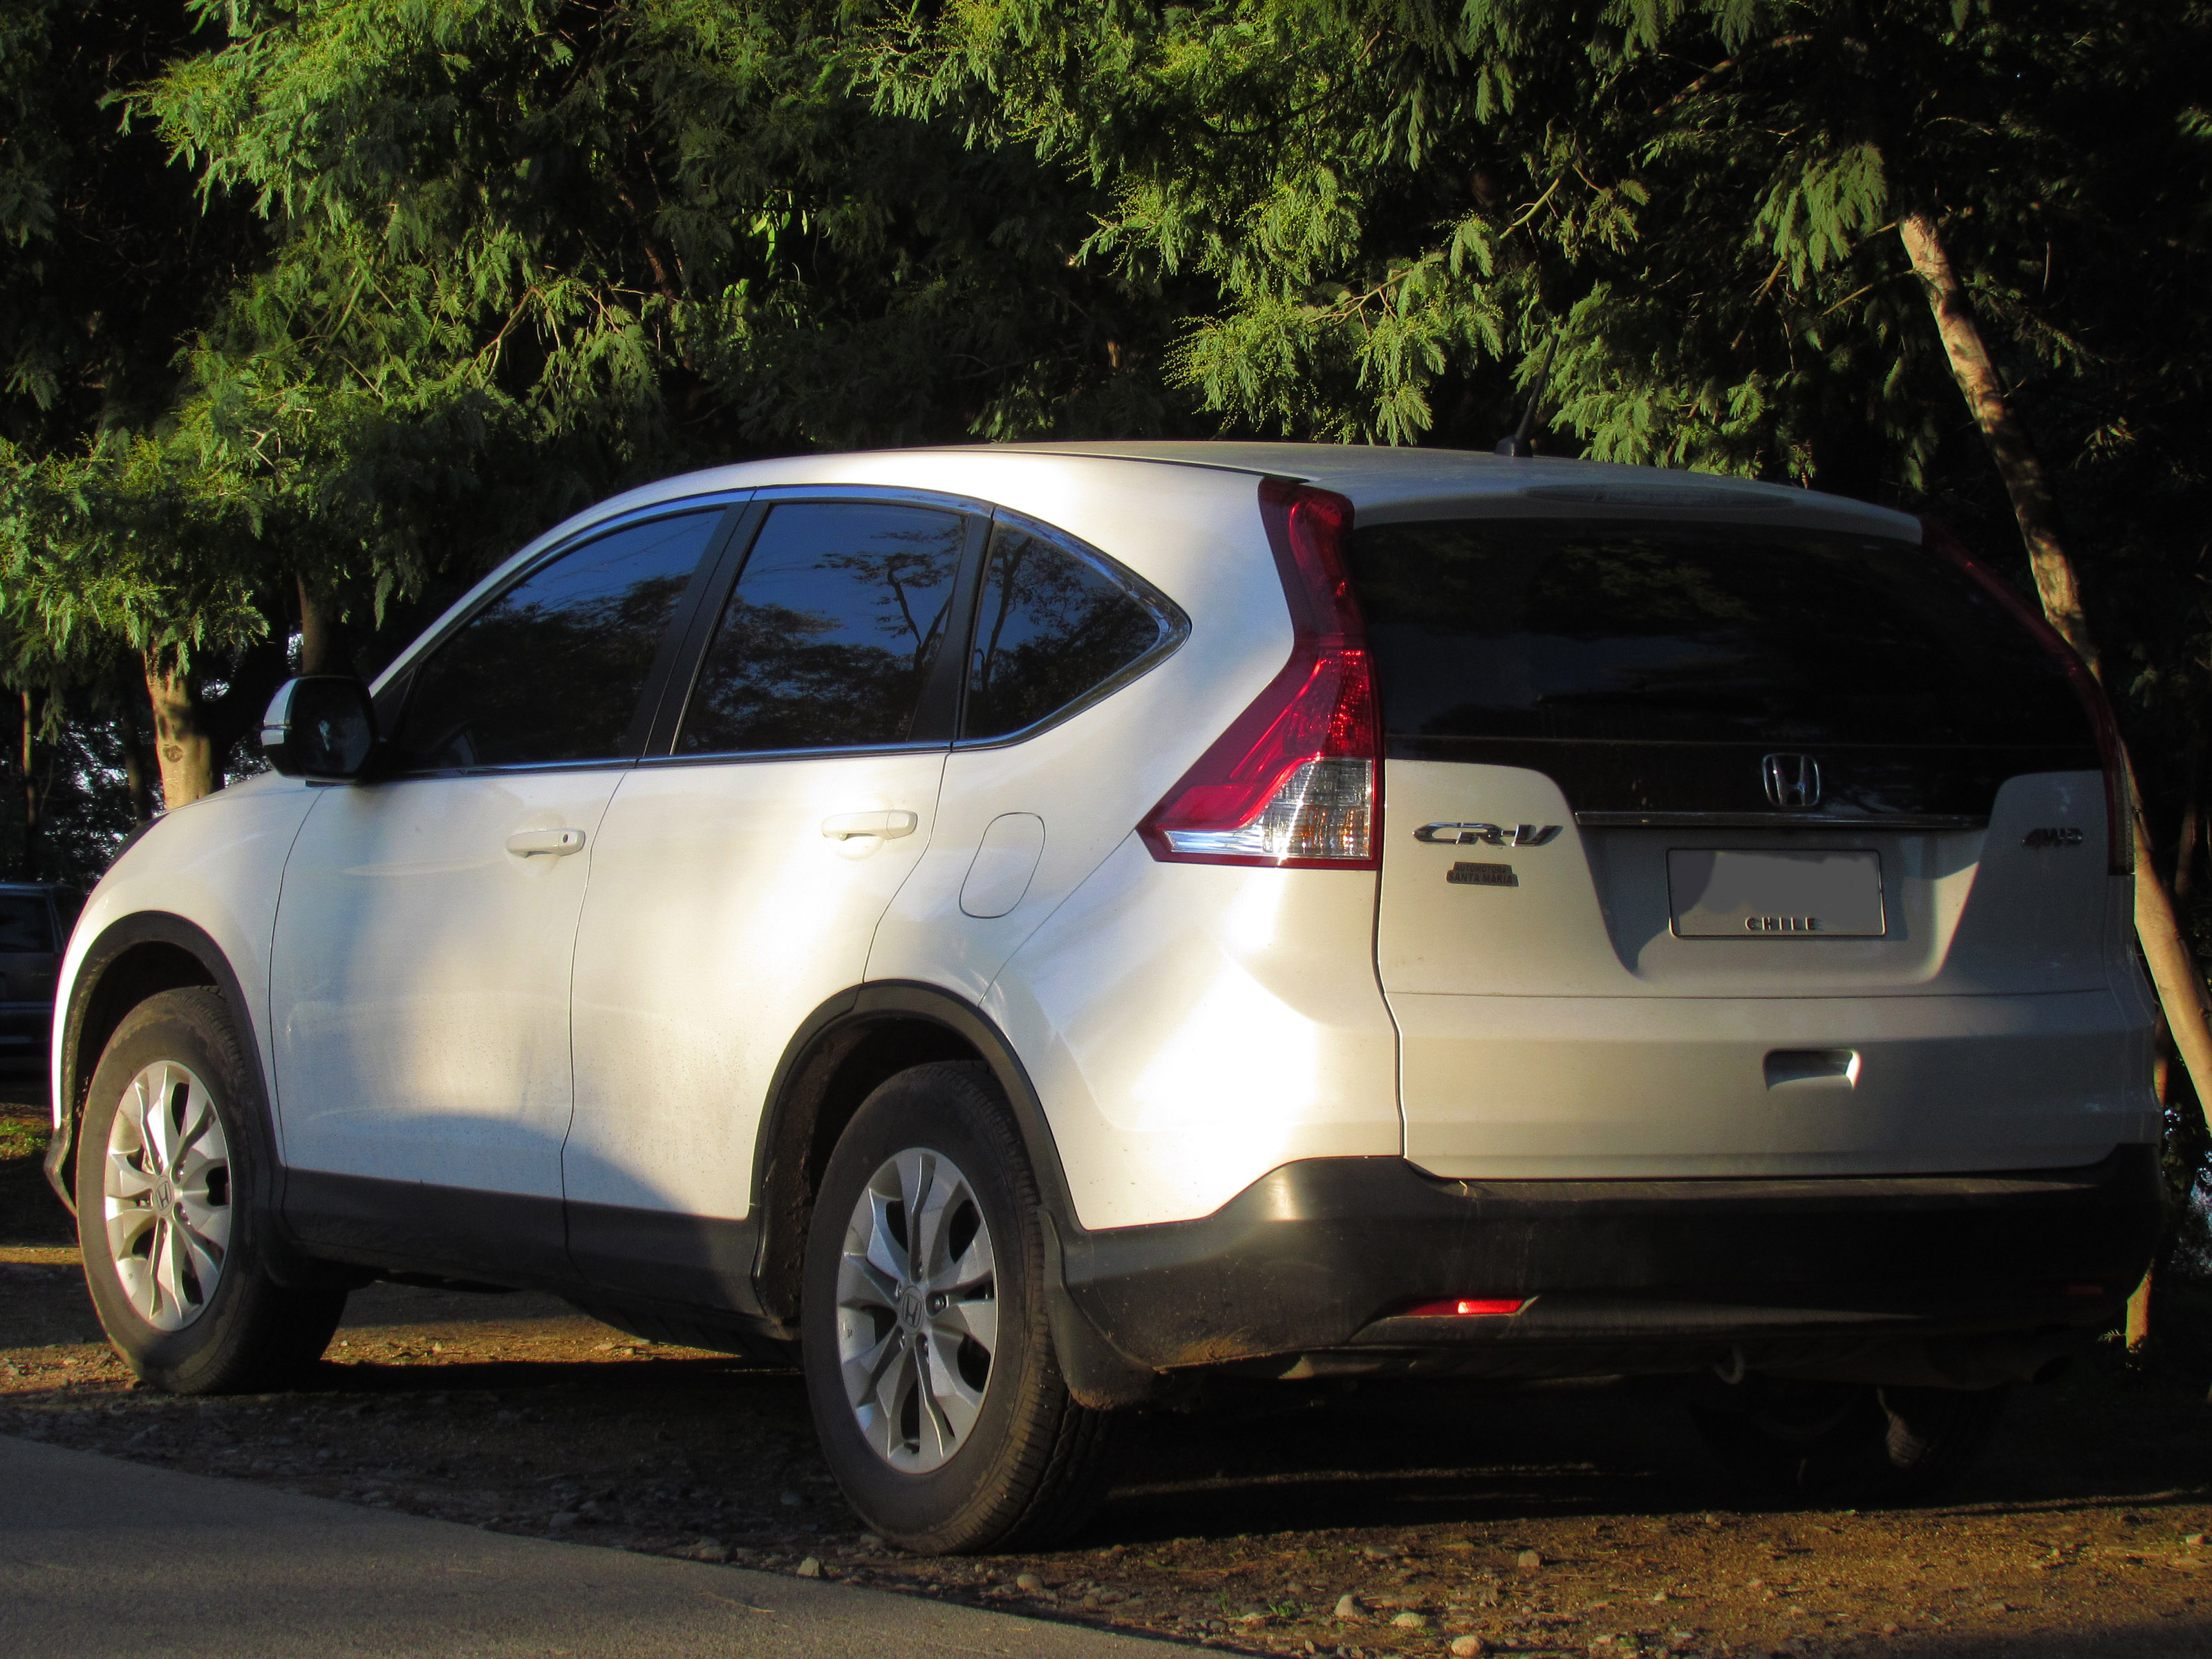 2013 Honda CRV Specifications, Pricing, Pictures and Videos